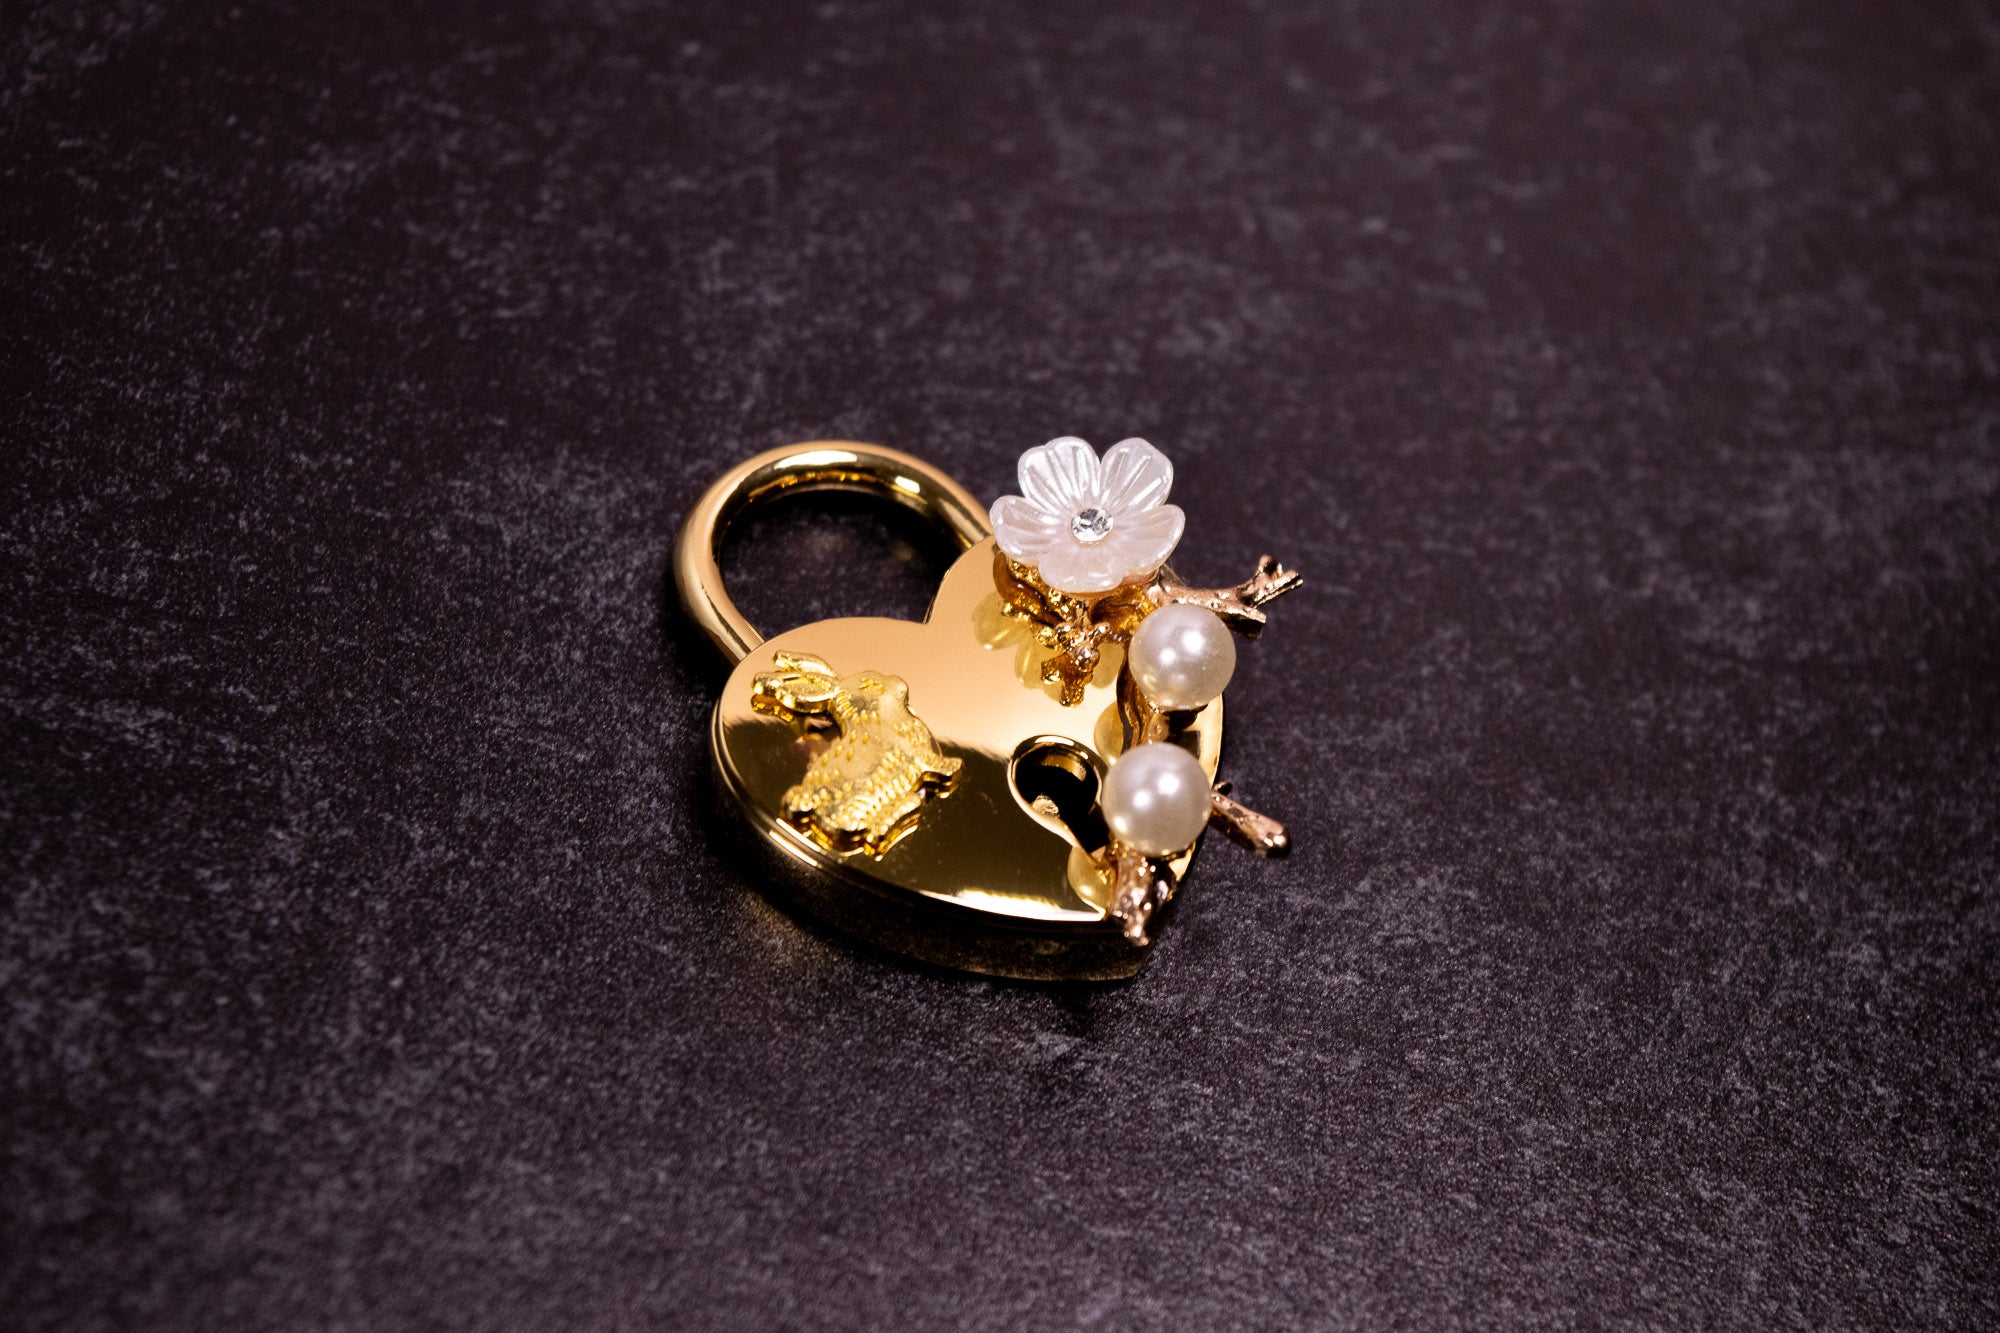 Gold Deluxe "Bunny" Lock _ LIMITED _